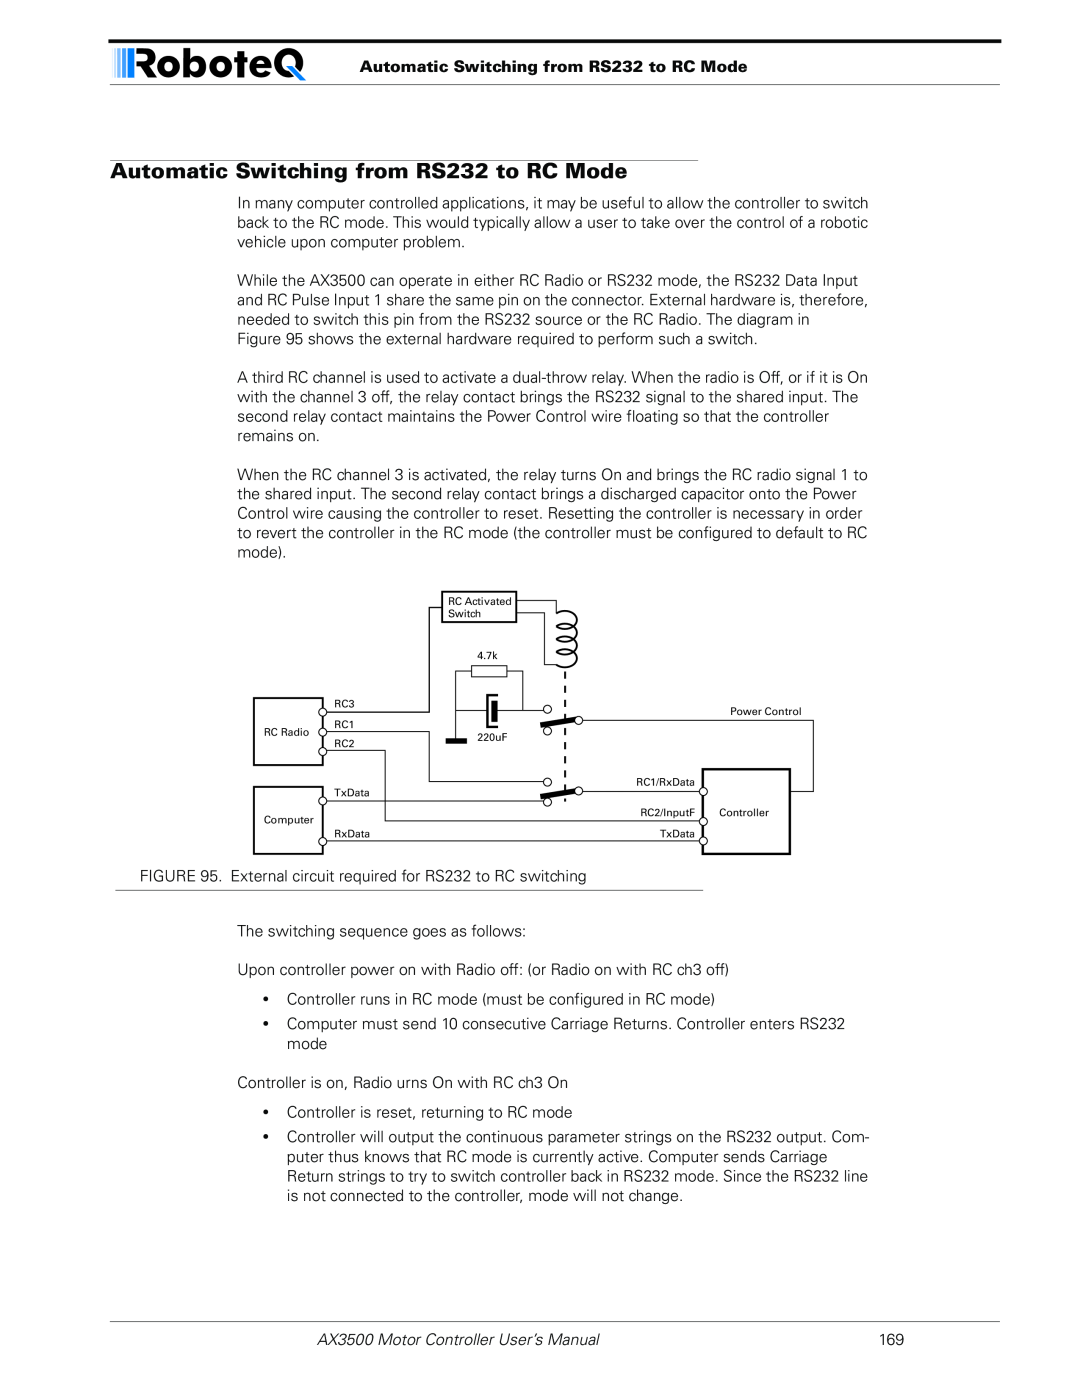 RoboteQ user manual Automatic Switching from RS232 to RC Mode, AX3500 Motor Controller User’s Manual 